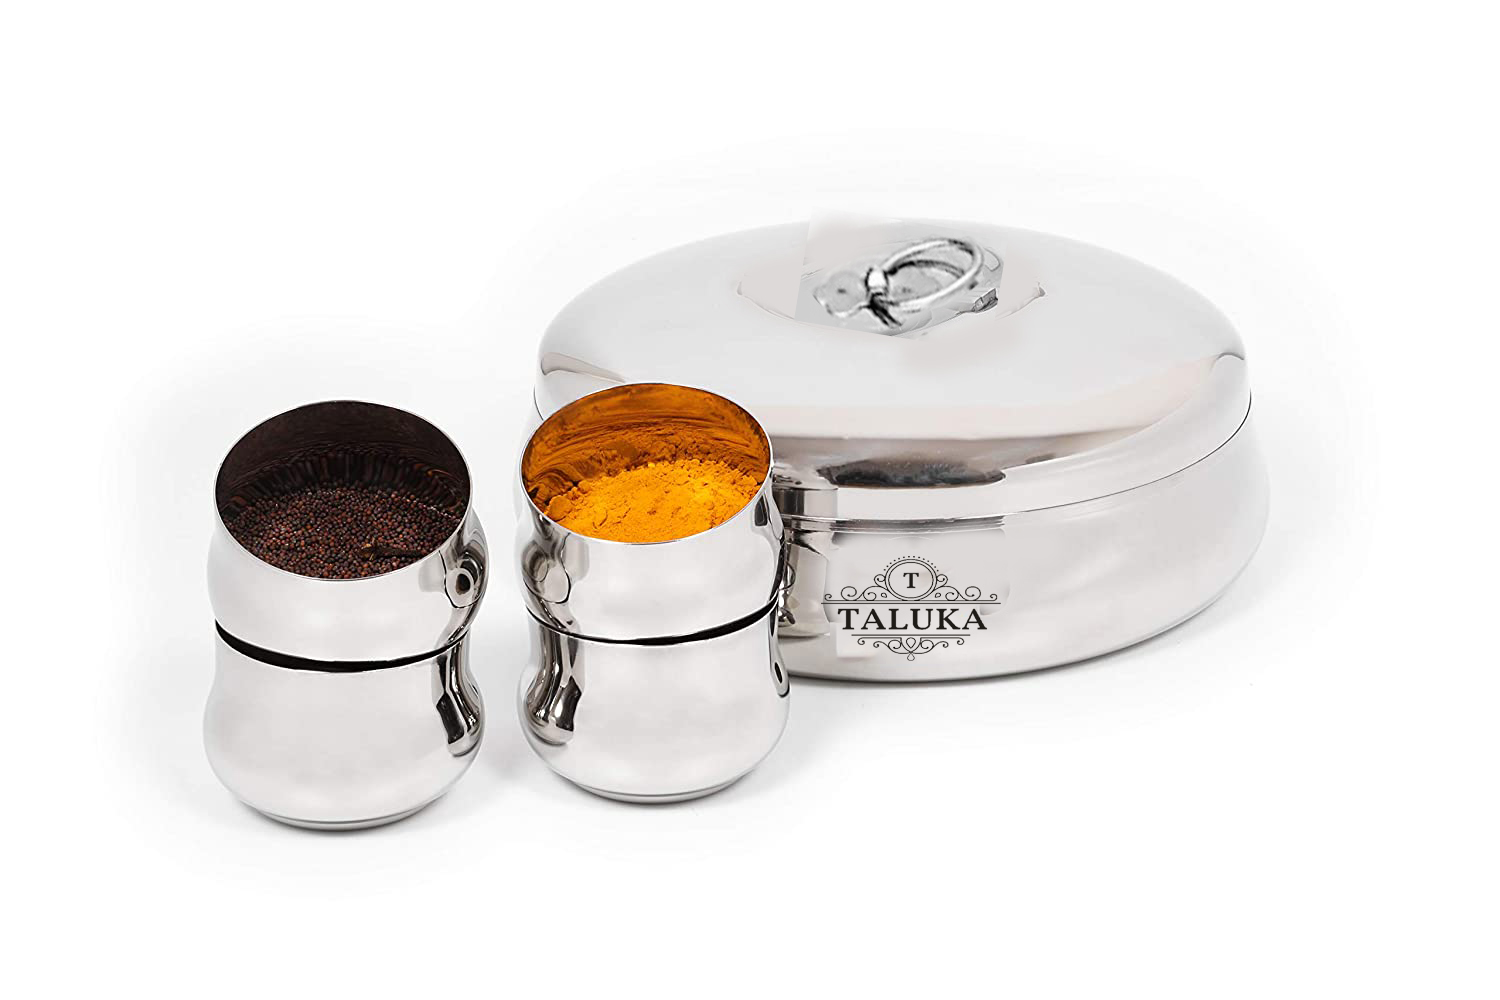 Taluka Stainless Steel Smart Kitchen Masala Box / Spice-box/masala-dani with 7 Containers and Spoon, Lid with Handle